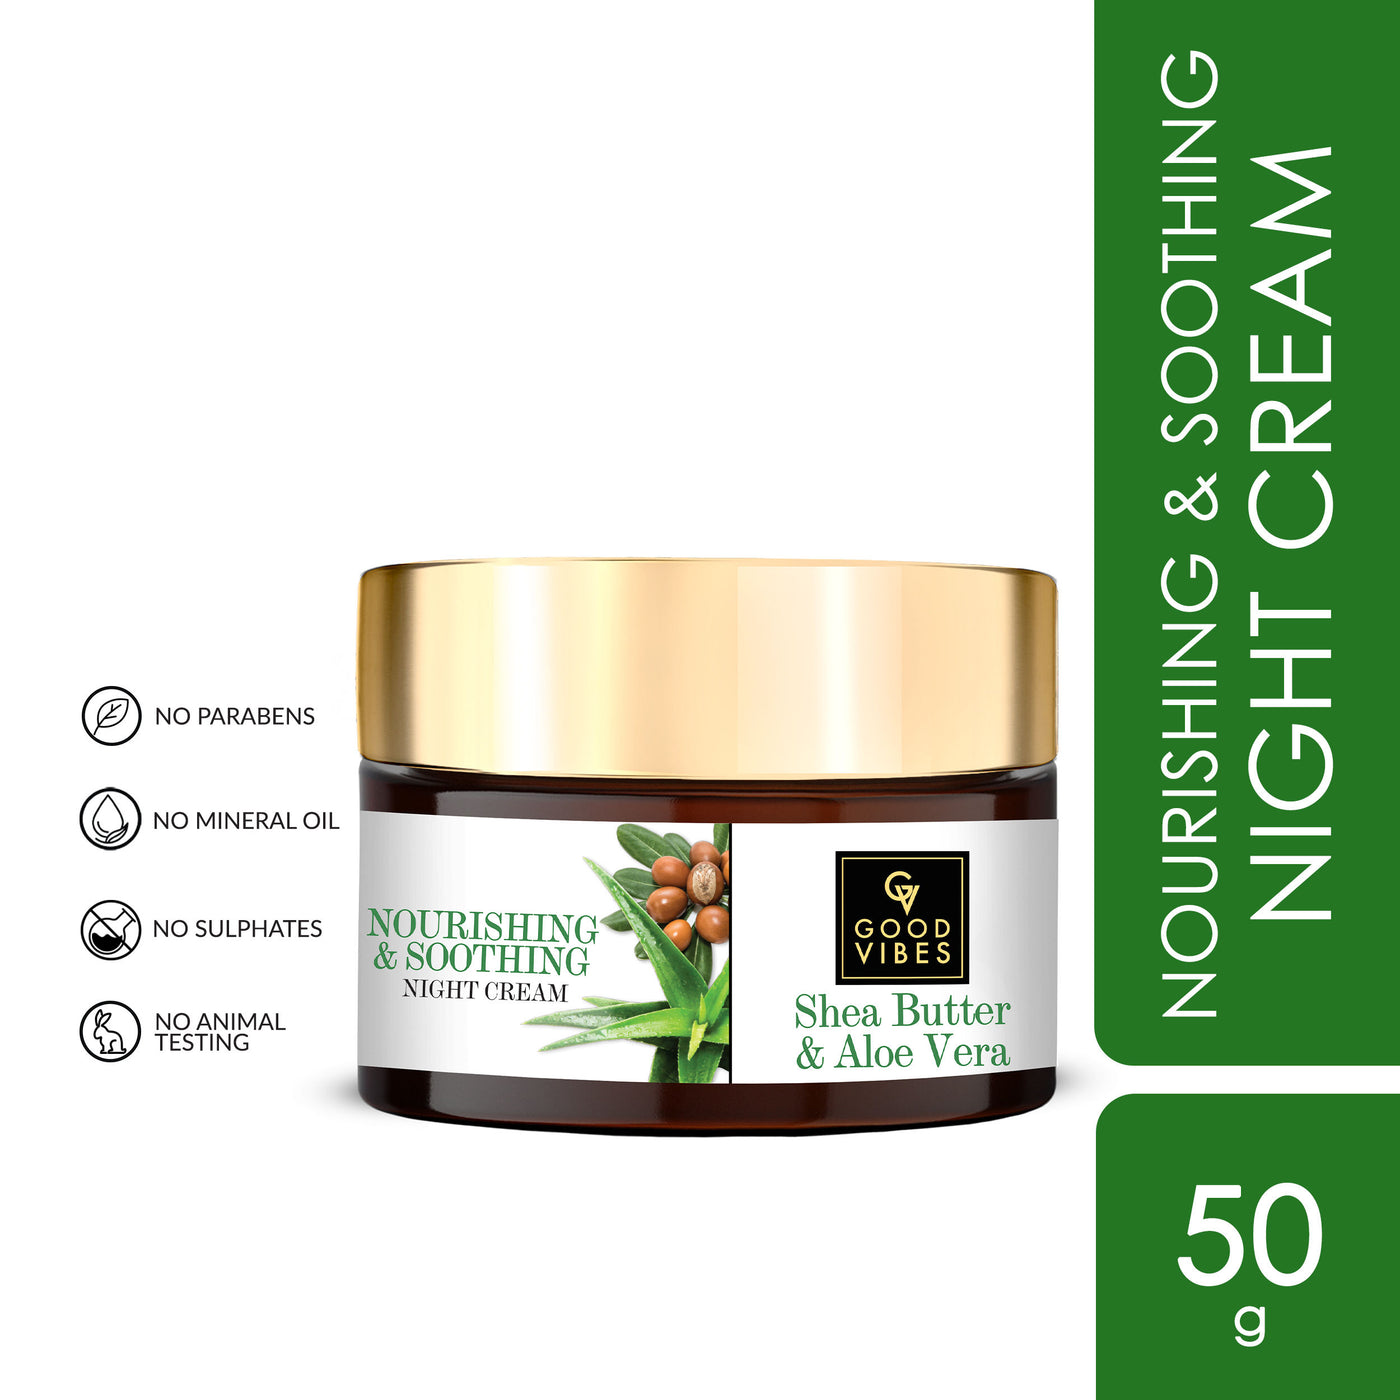 good-vibes-shea-butter-aloe-vera-nourishing-soothing-night-cream-moisturizing-soothing-no-parabens-no-sulphates-no-mineral-oil-50-gm-2